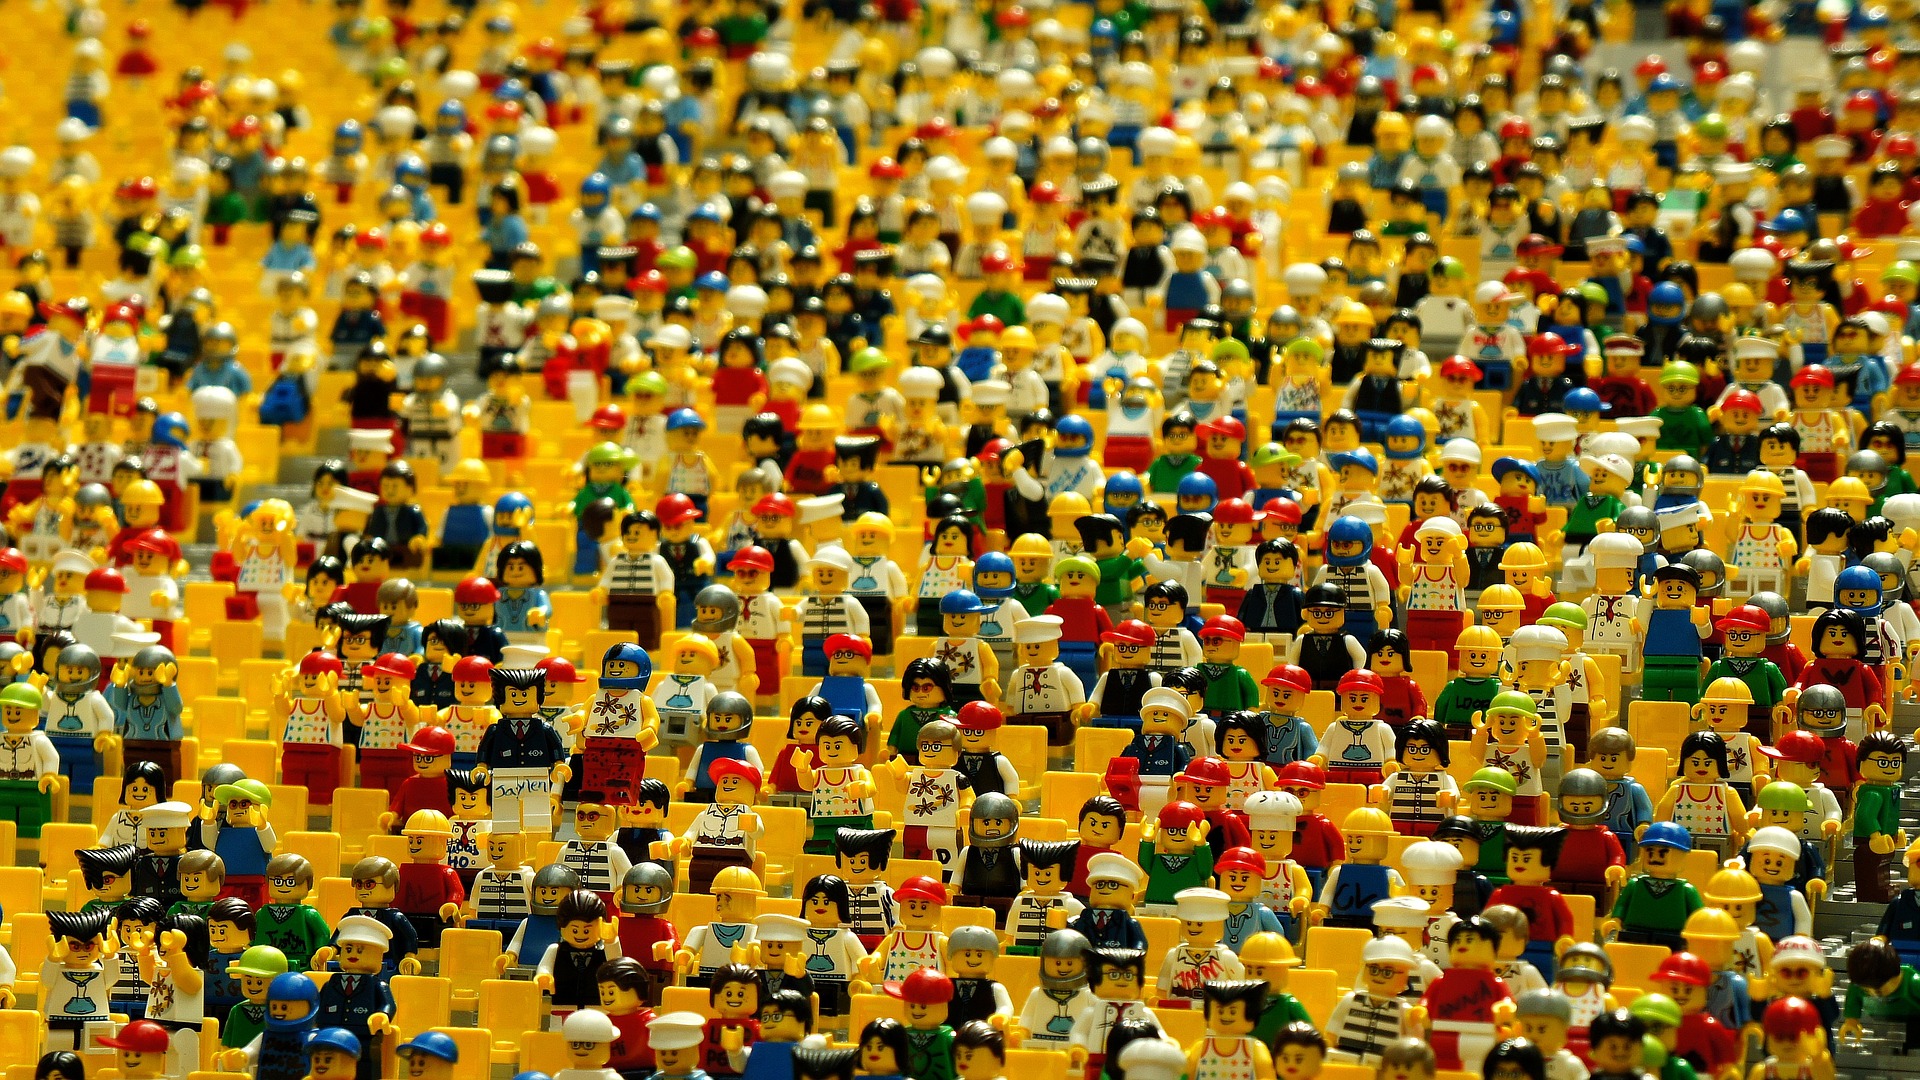 Lego minifigures Full HD 壁纸 and 背景 1920x1080 ID673335